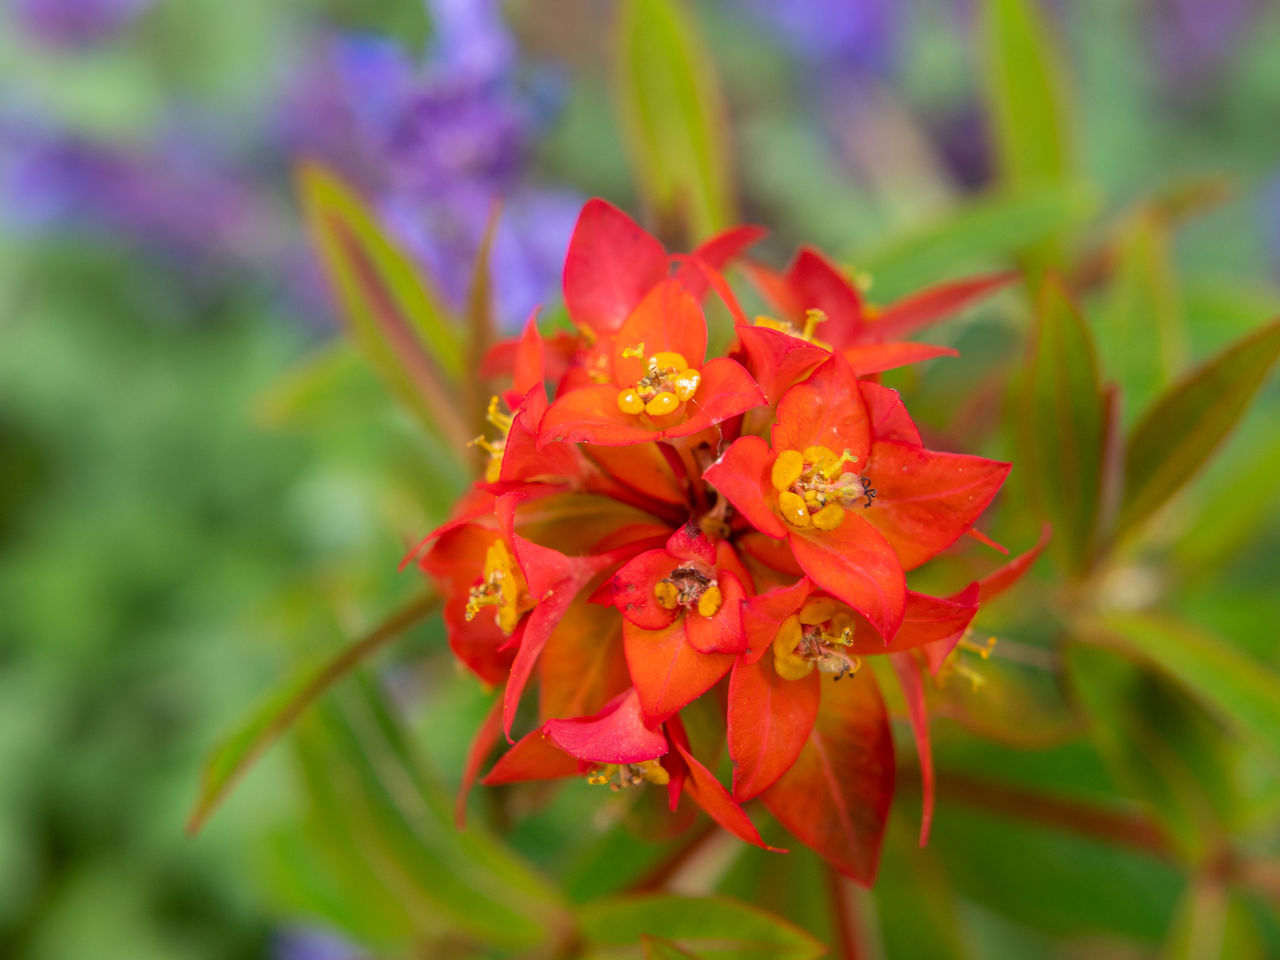 CLOSE-UP OF RED FLOWERING PLANTS